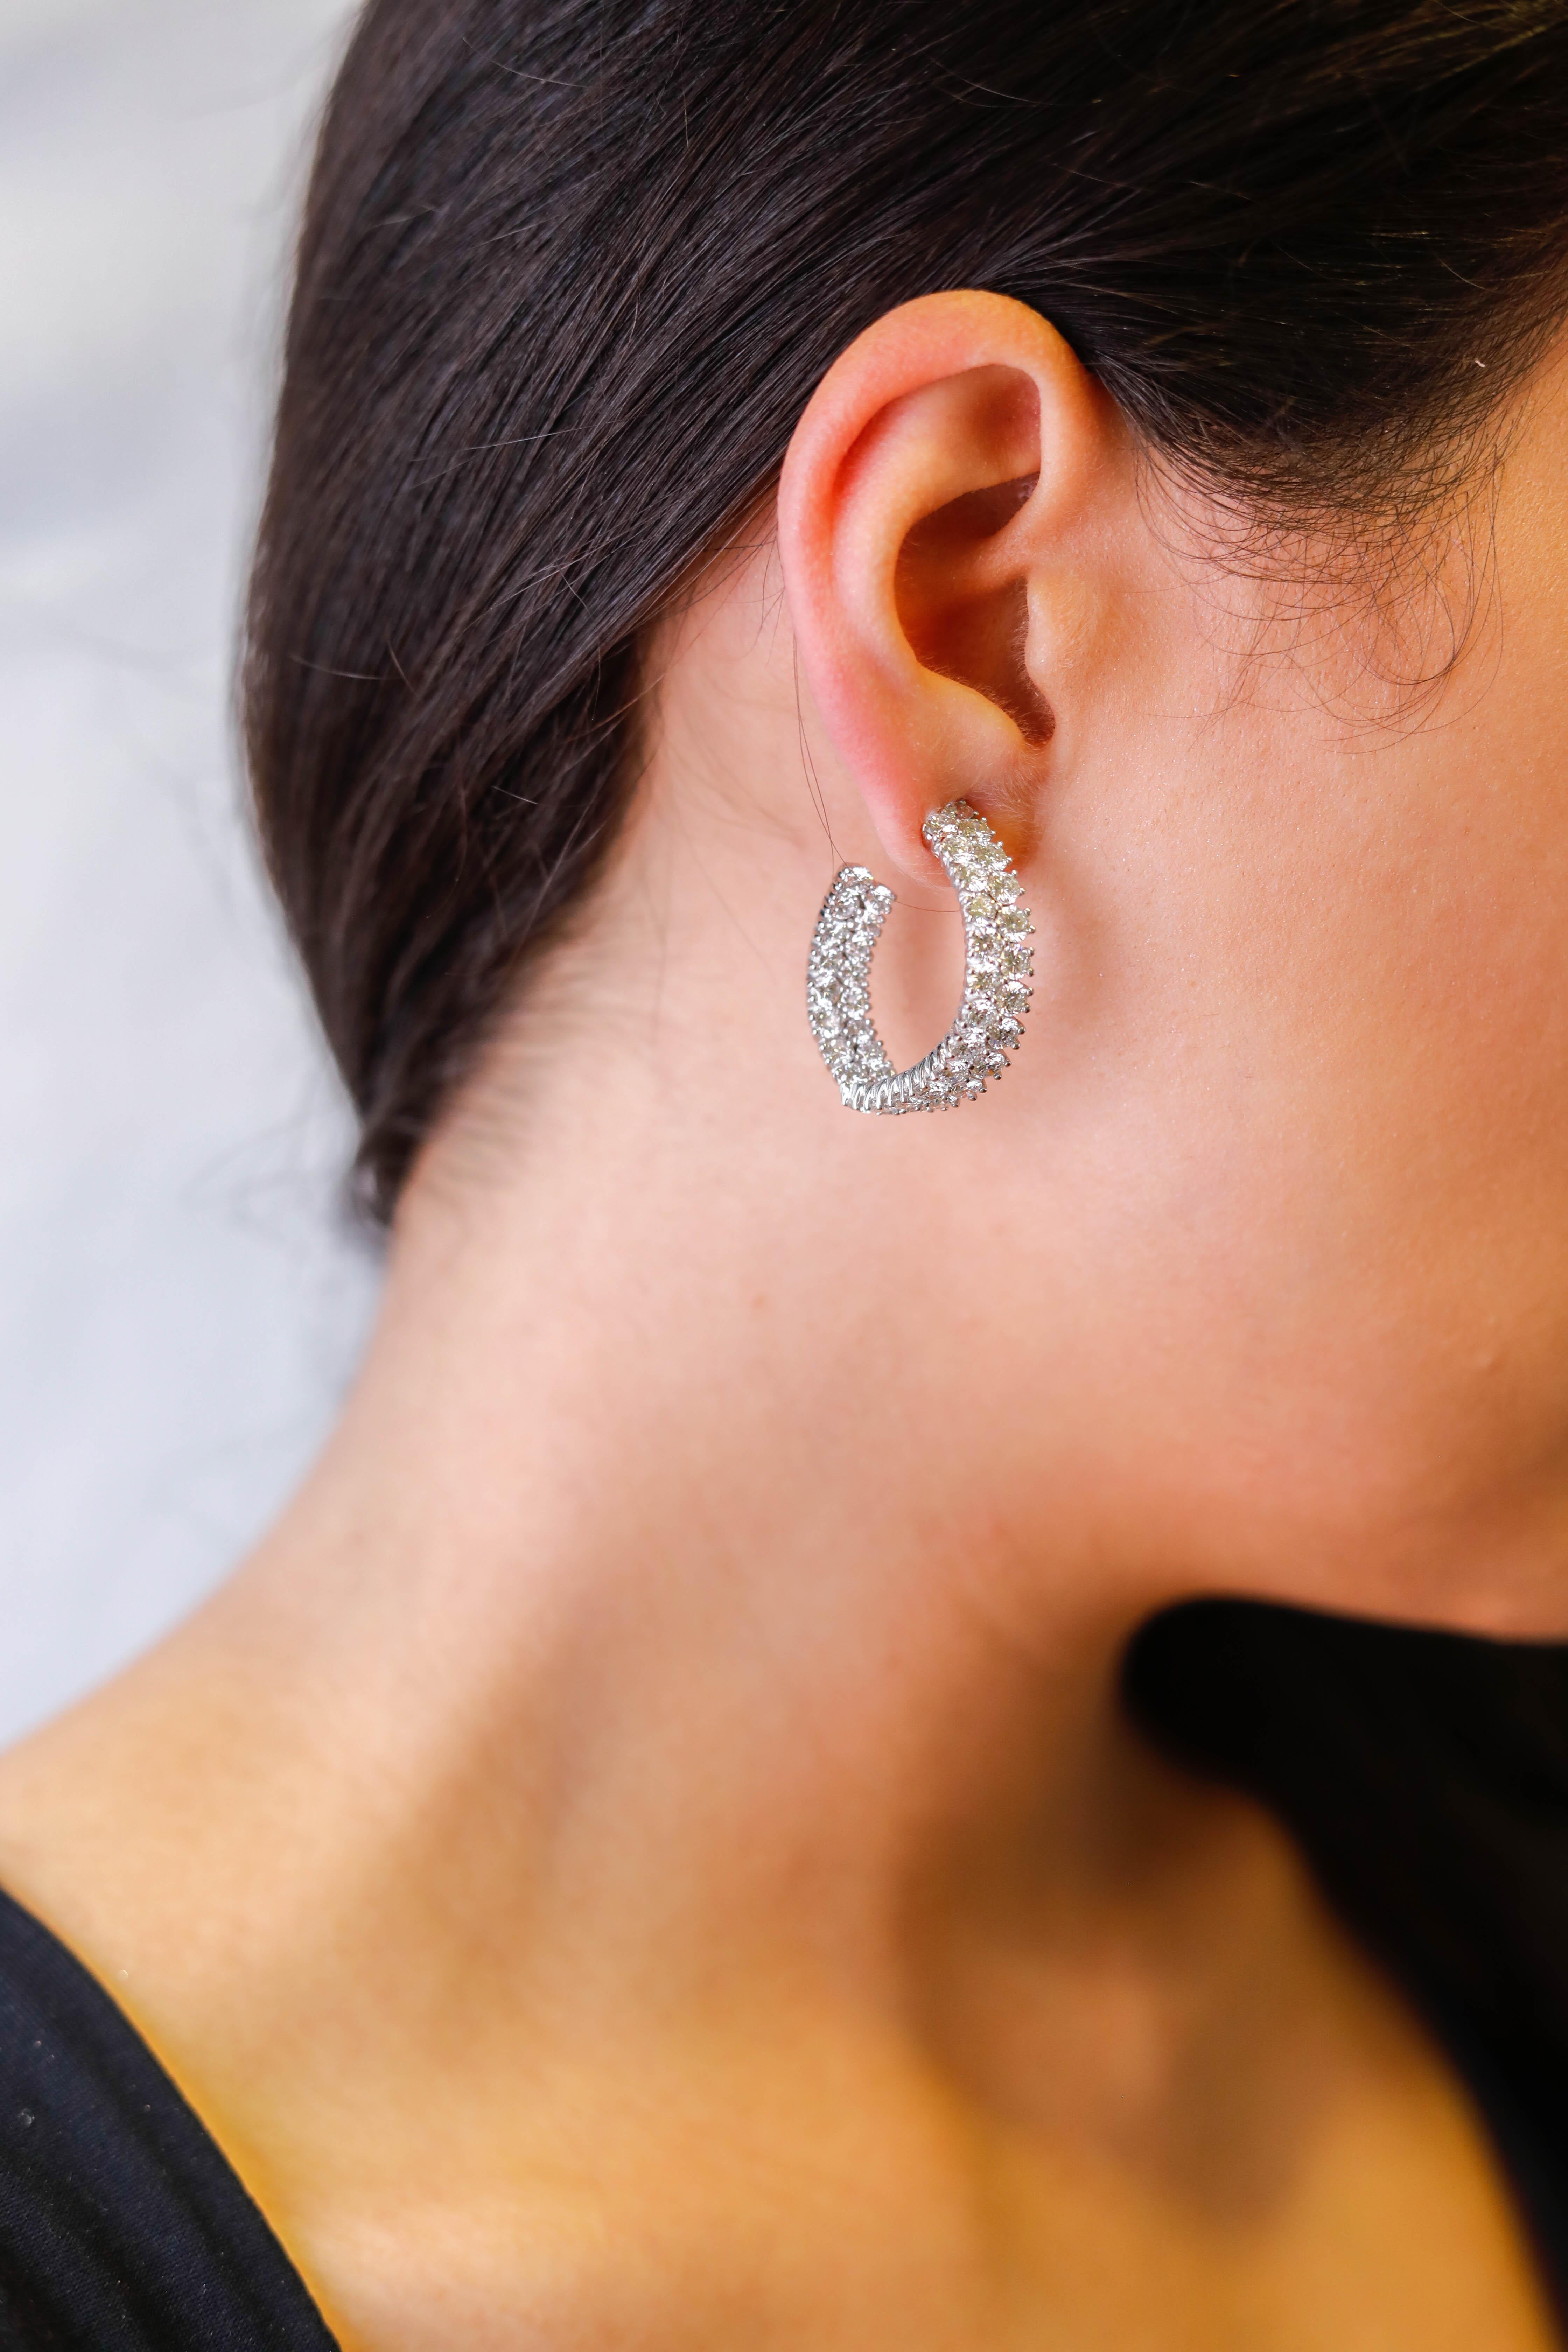 18 Karat White Gold 10 Carat Round White Diamond Fine Hoop Earrings Jewelry

The light really frisks in these Hoop Style Earrings making them sophisticated in every way. Fashioned in 18k Solid White Gold, these earrings are layered in a double row